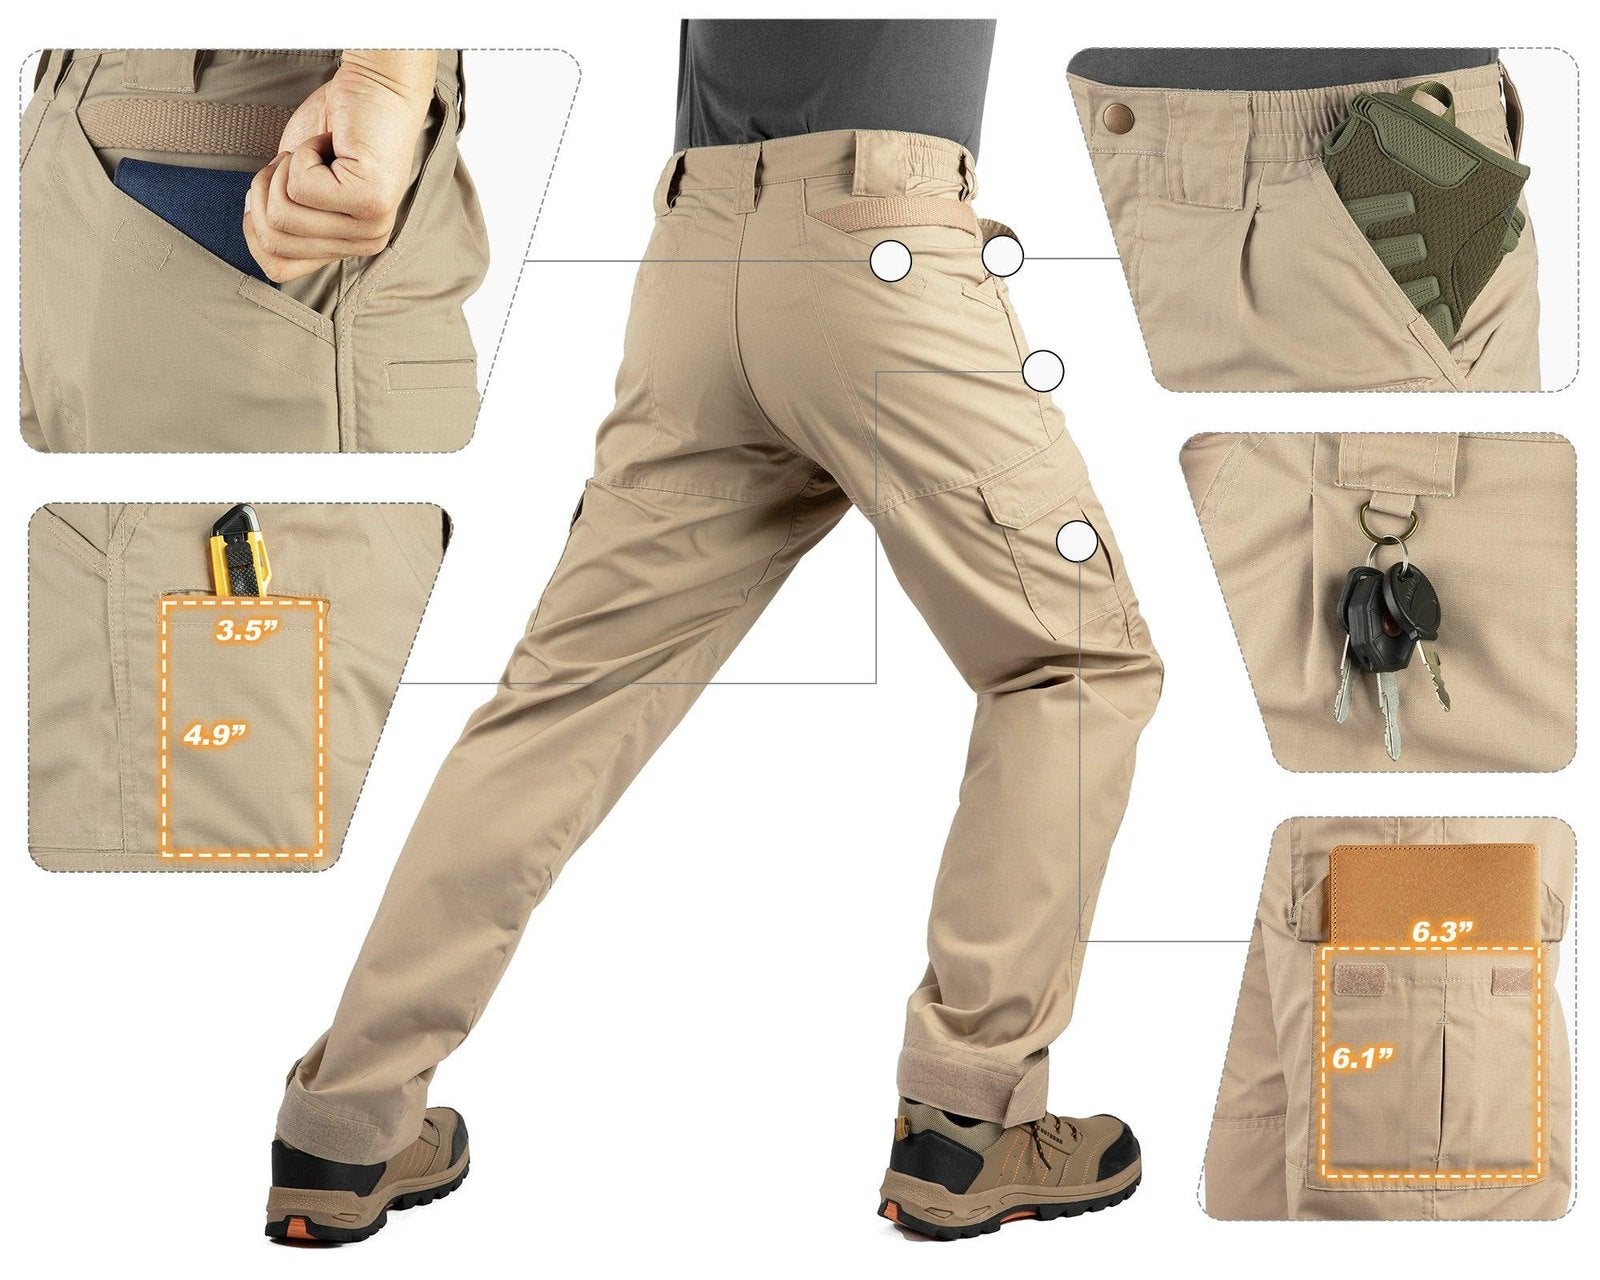 Men's UPF 40+ Convertible Zip Off Hiking Pants with 6 Pockets – 33,000ft